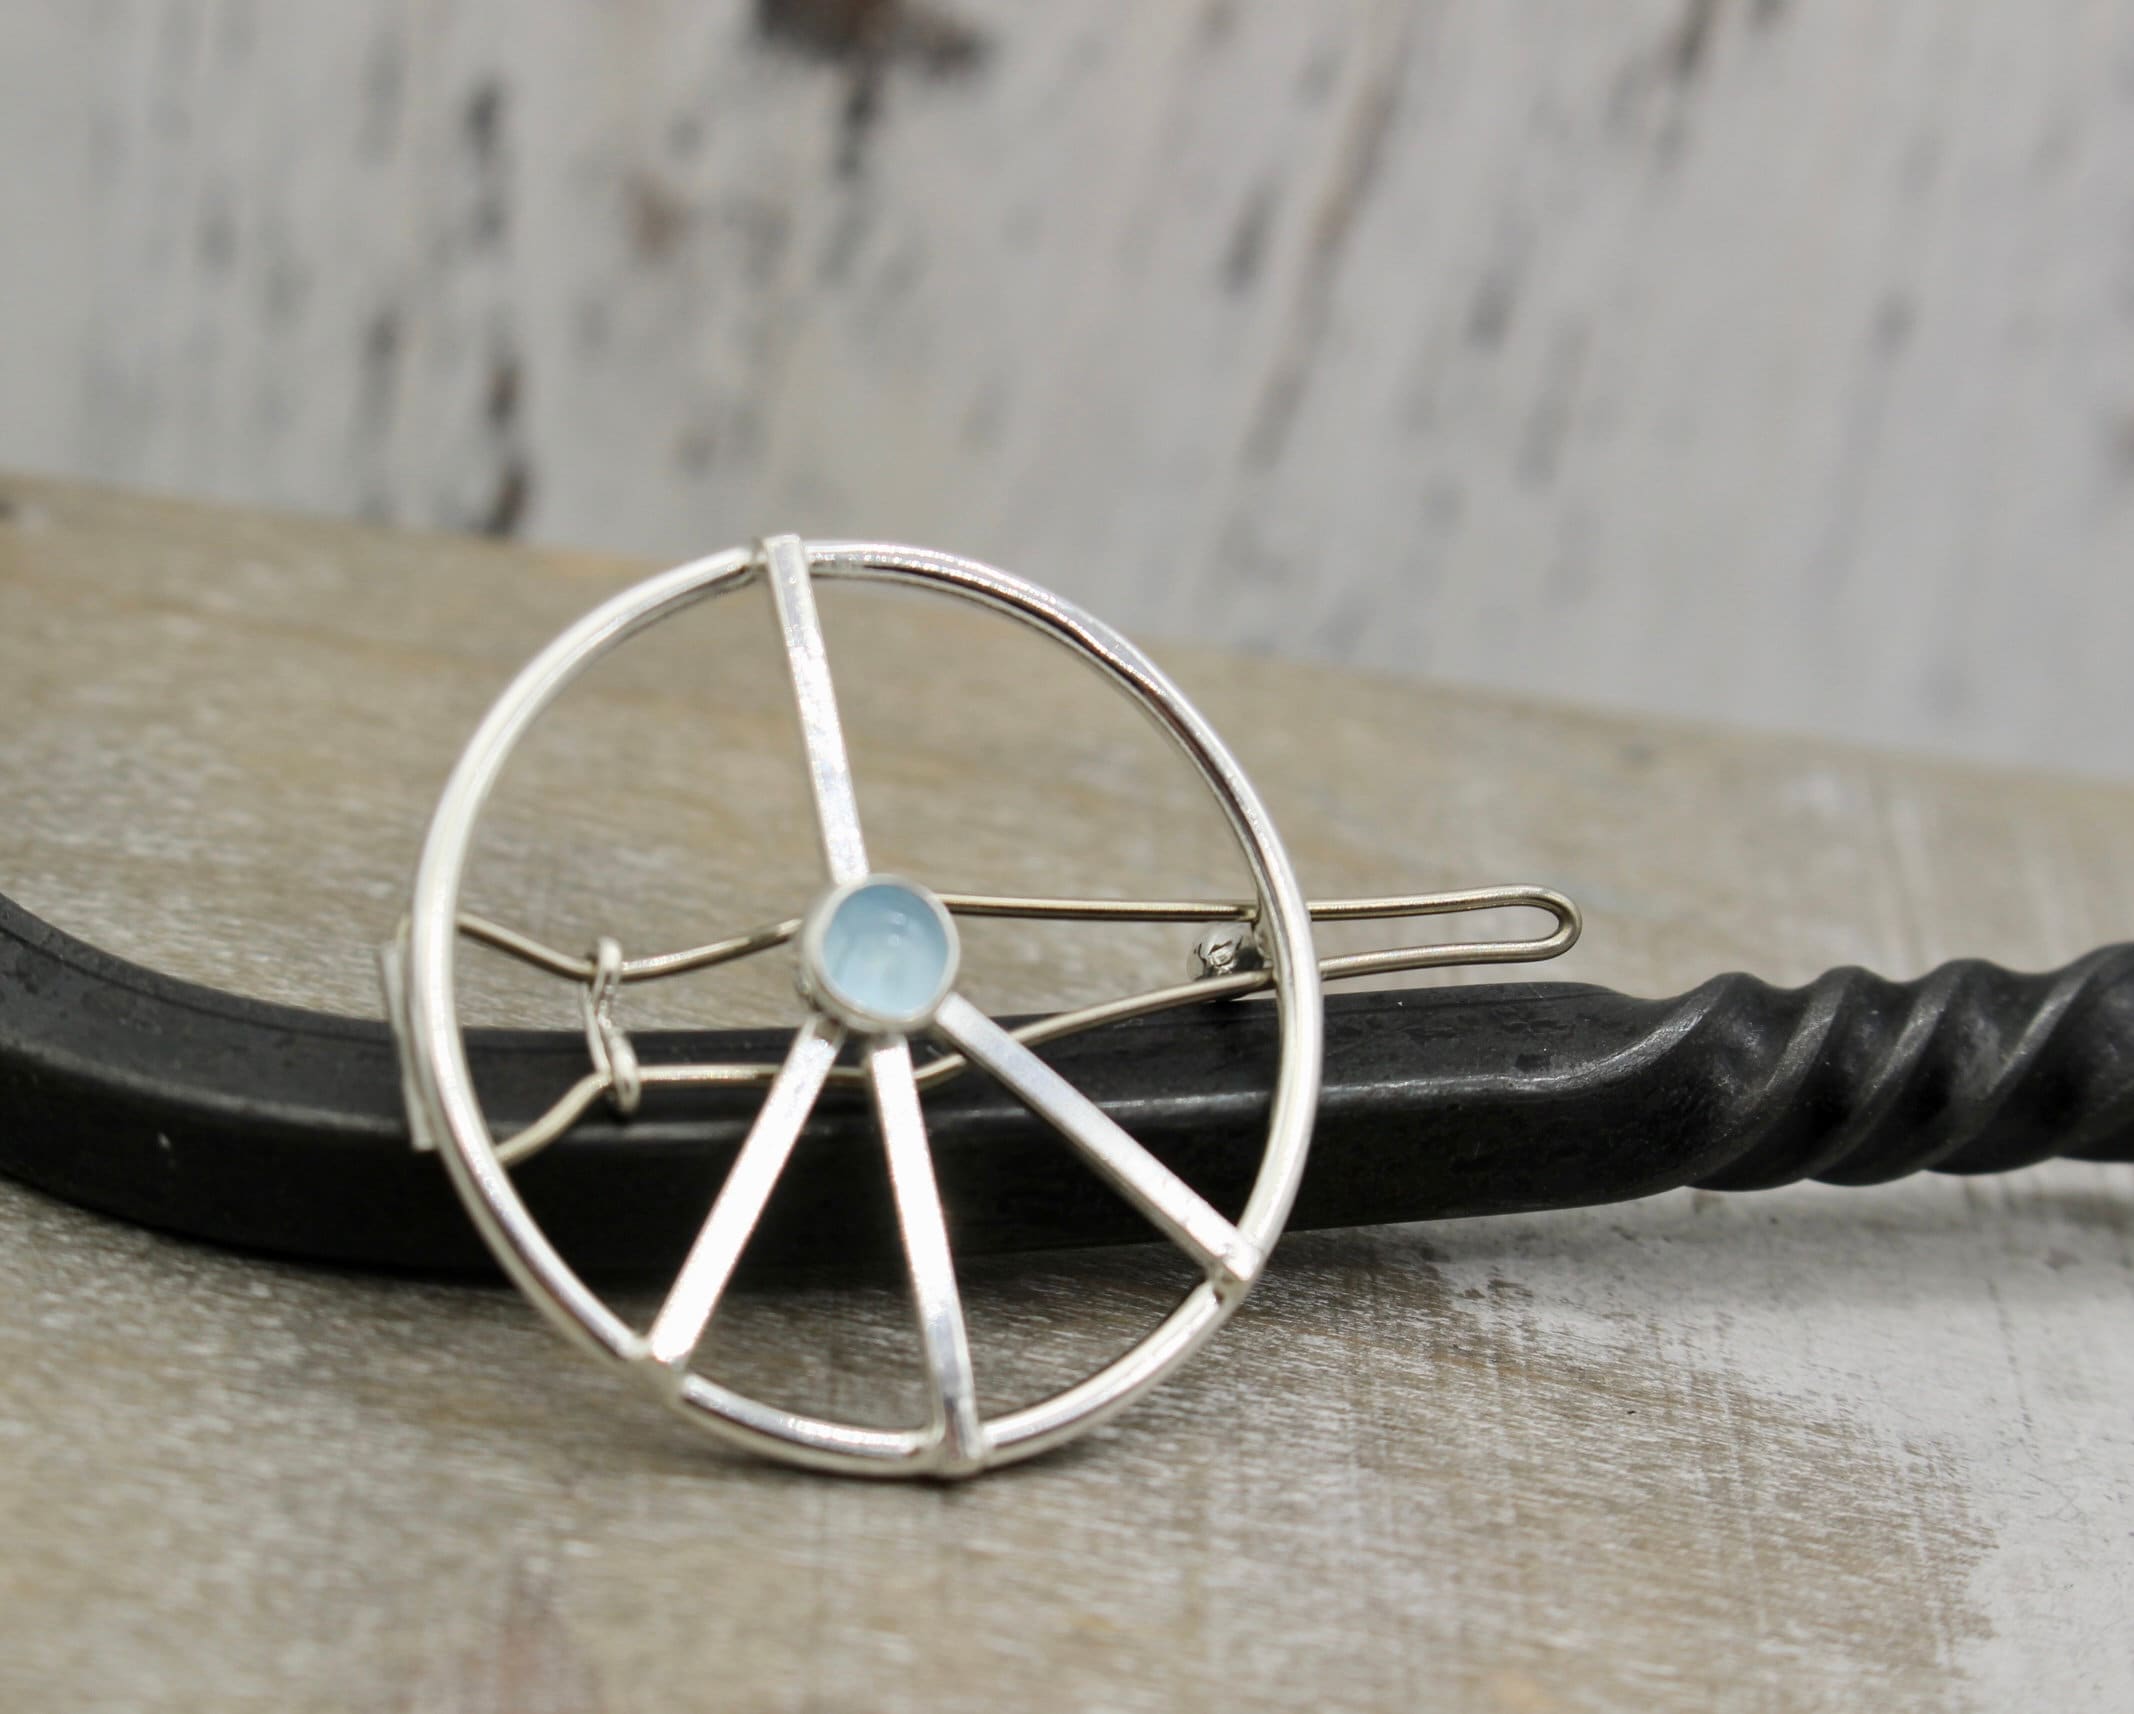 Small Gemstone barrette  - Sterling Silver Peace Sign  Barrette - hair clip - Hair Jewelry - Small Barrette - Gift for her - bangs - boho